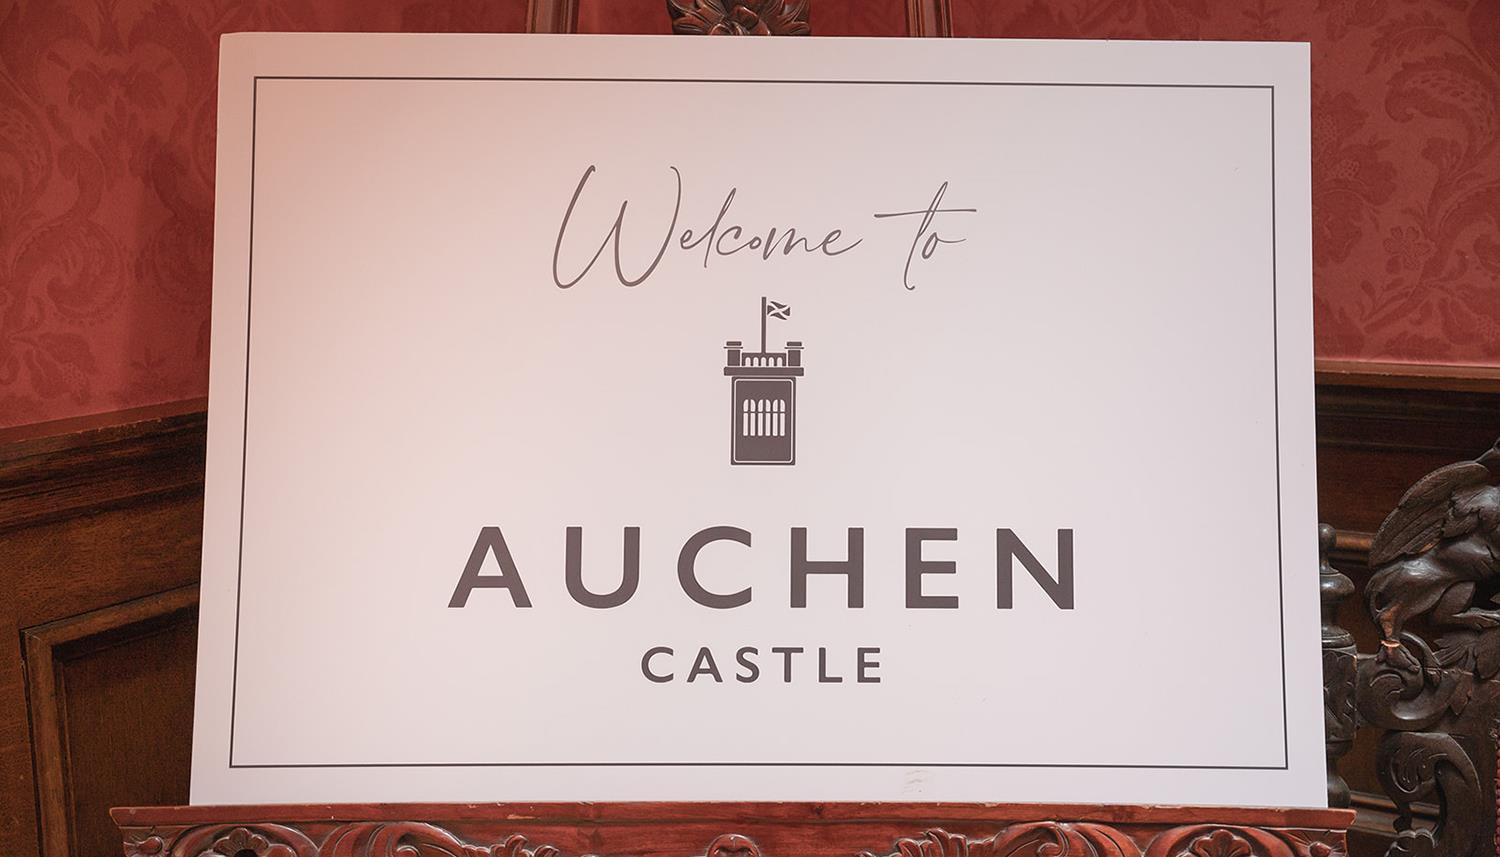 A warm welcome at Auchen. Photo Credit: Duncan Ireland Photography